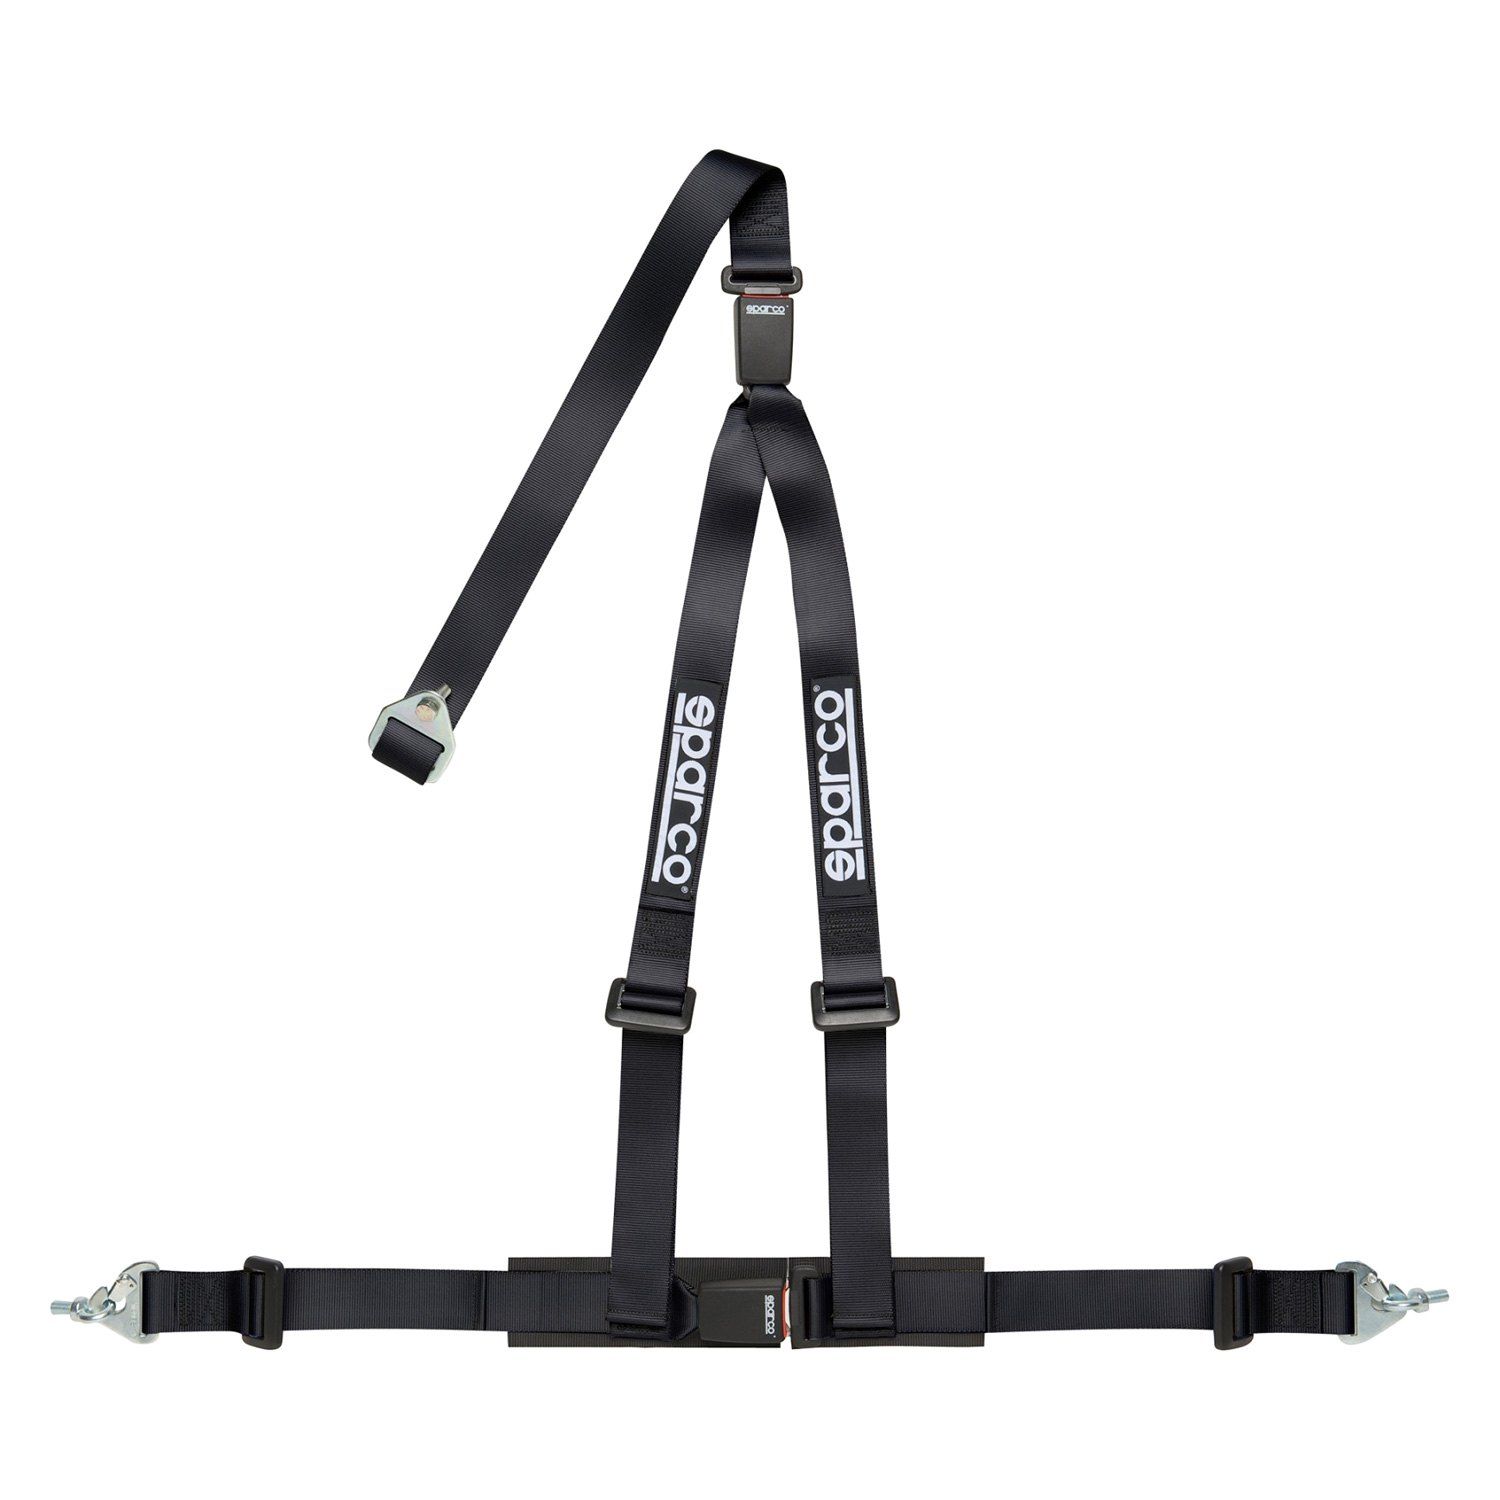 Sparco Tuner Harness 3-Point Double Release Belt Width: 2" Black